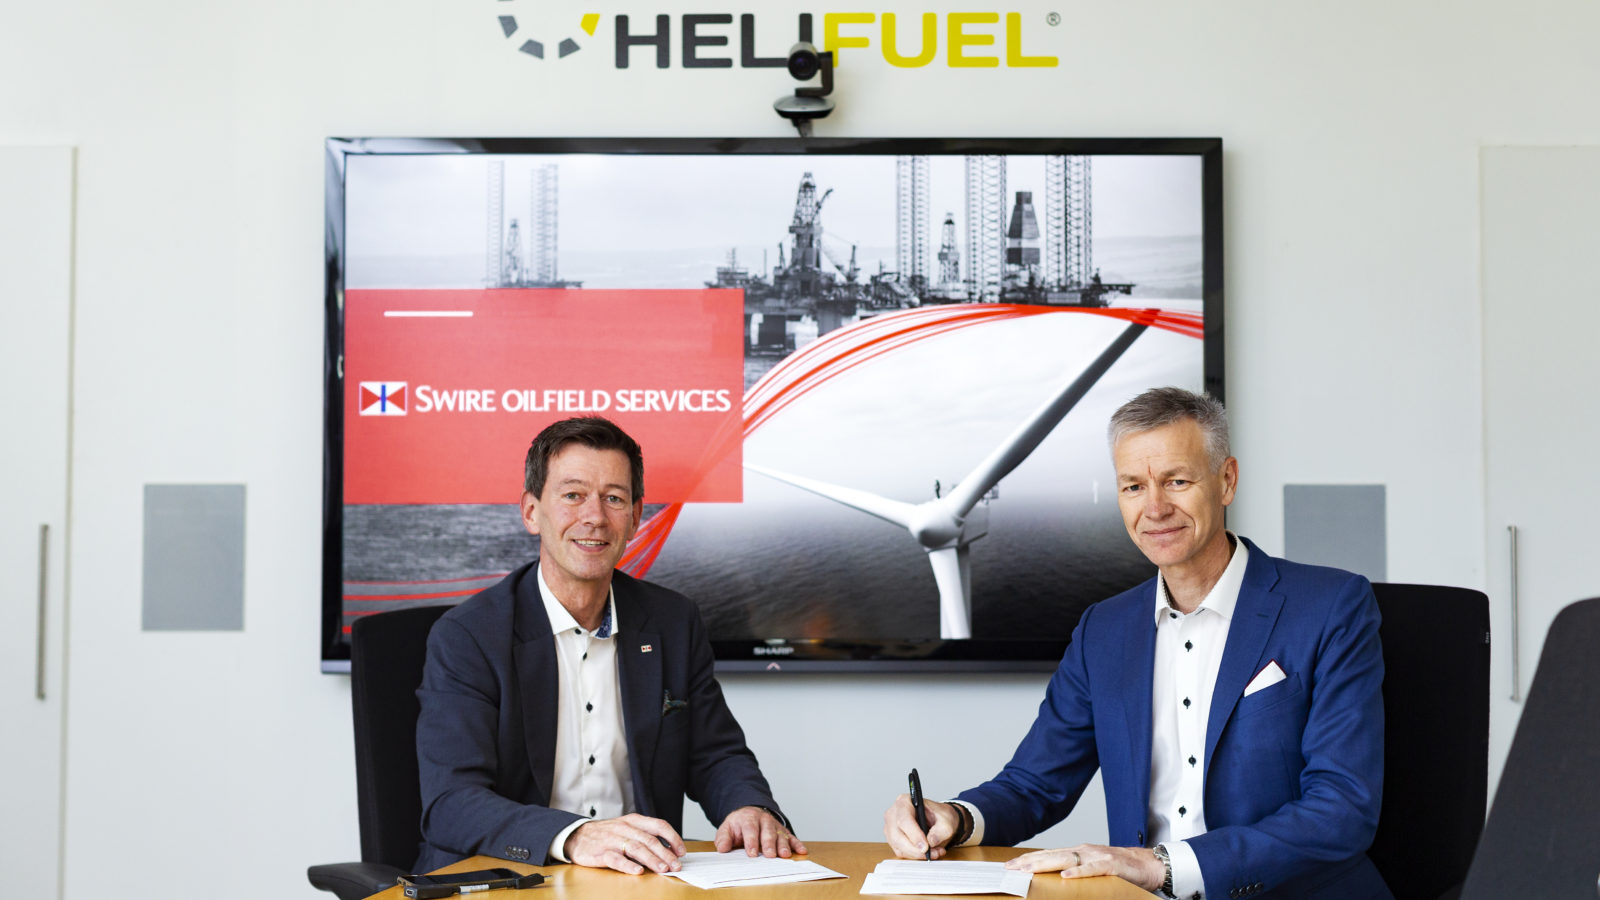 Swire Oilfield Services acquires aviation services business, Helifuel AS